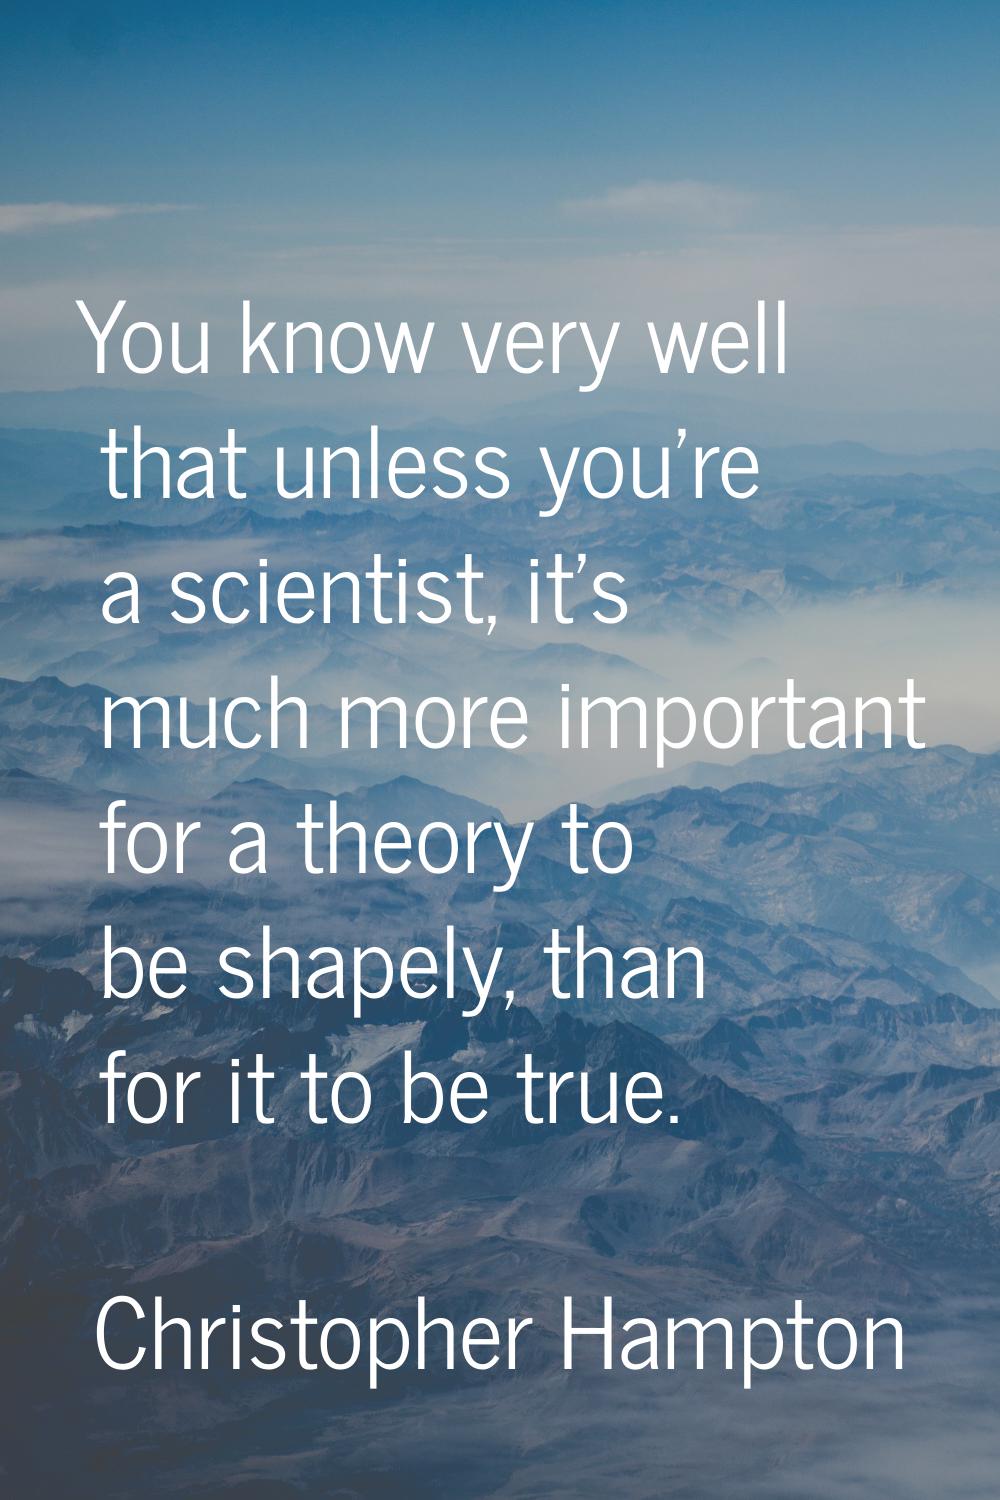 You know very well that unless you're a scientist, it's much more important for a theory to be shap